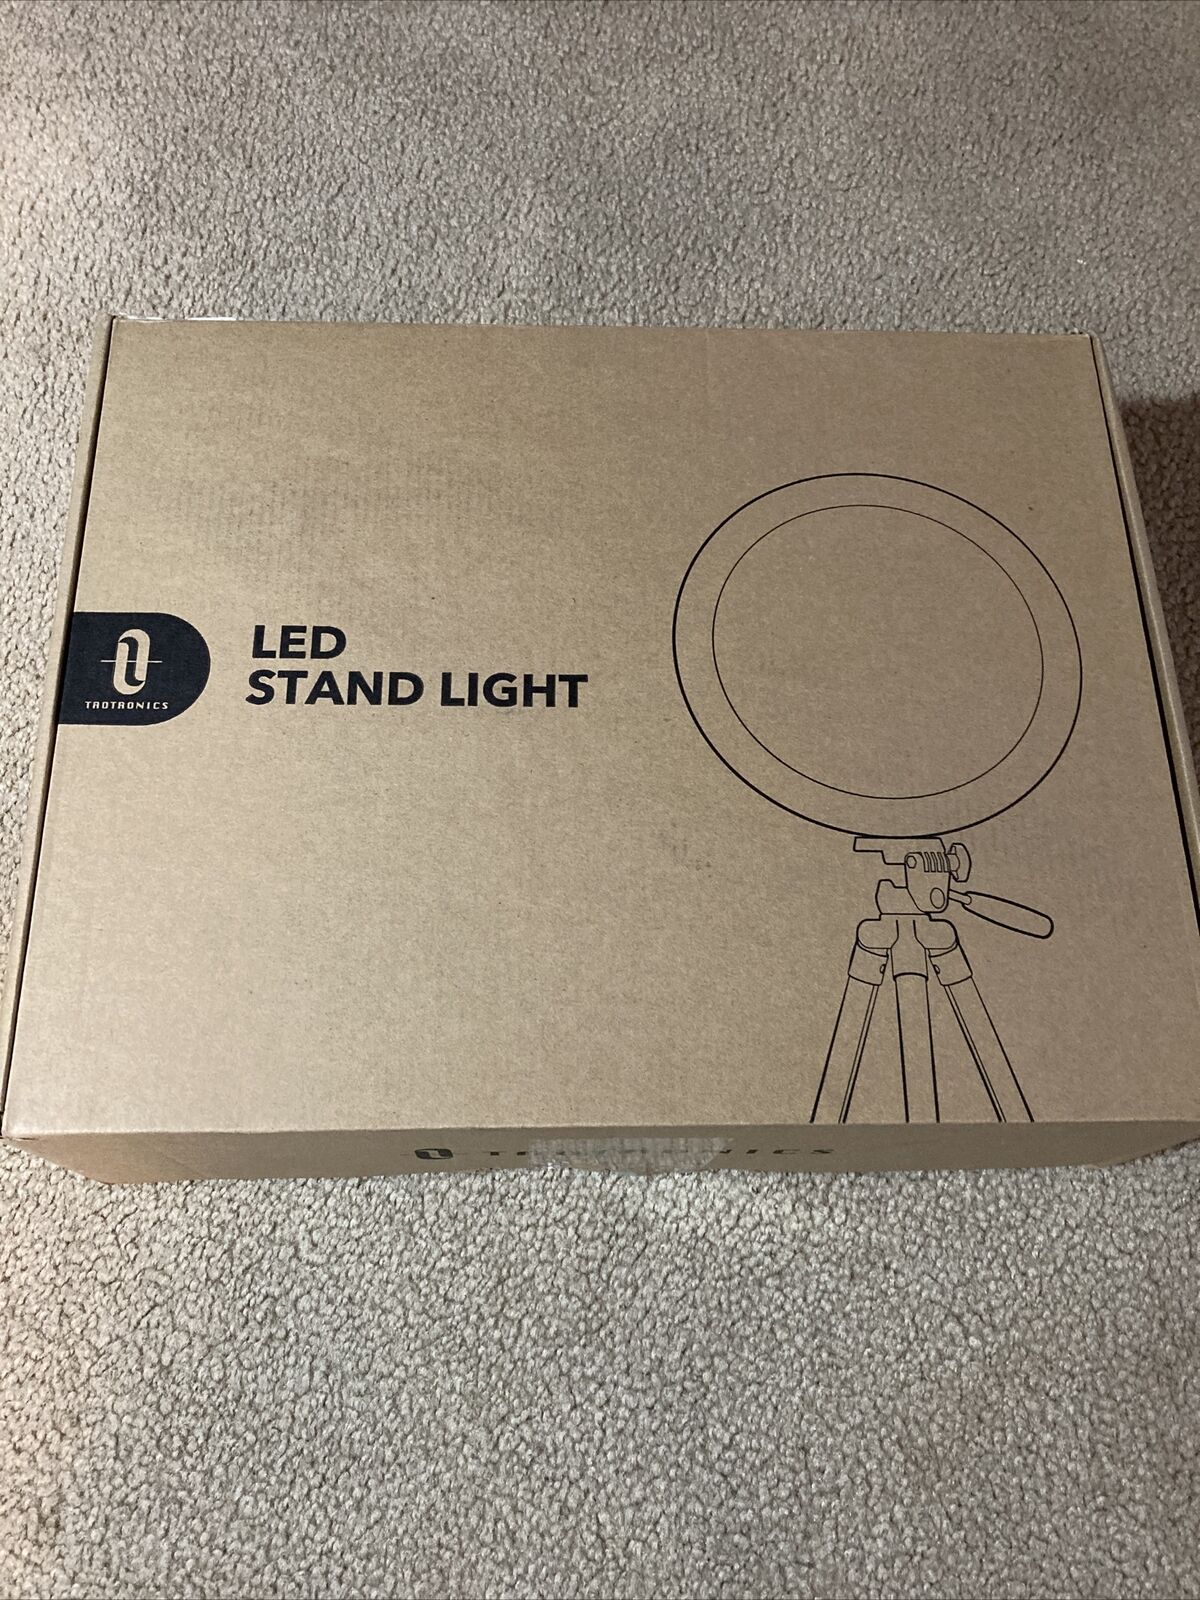 TaoTronics 12” LED Selfie Ring Light with Tripod Stand TT-CL027 OIB OMP WORKS